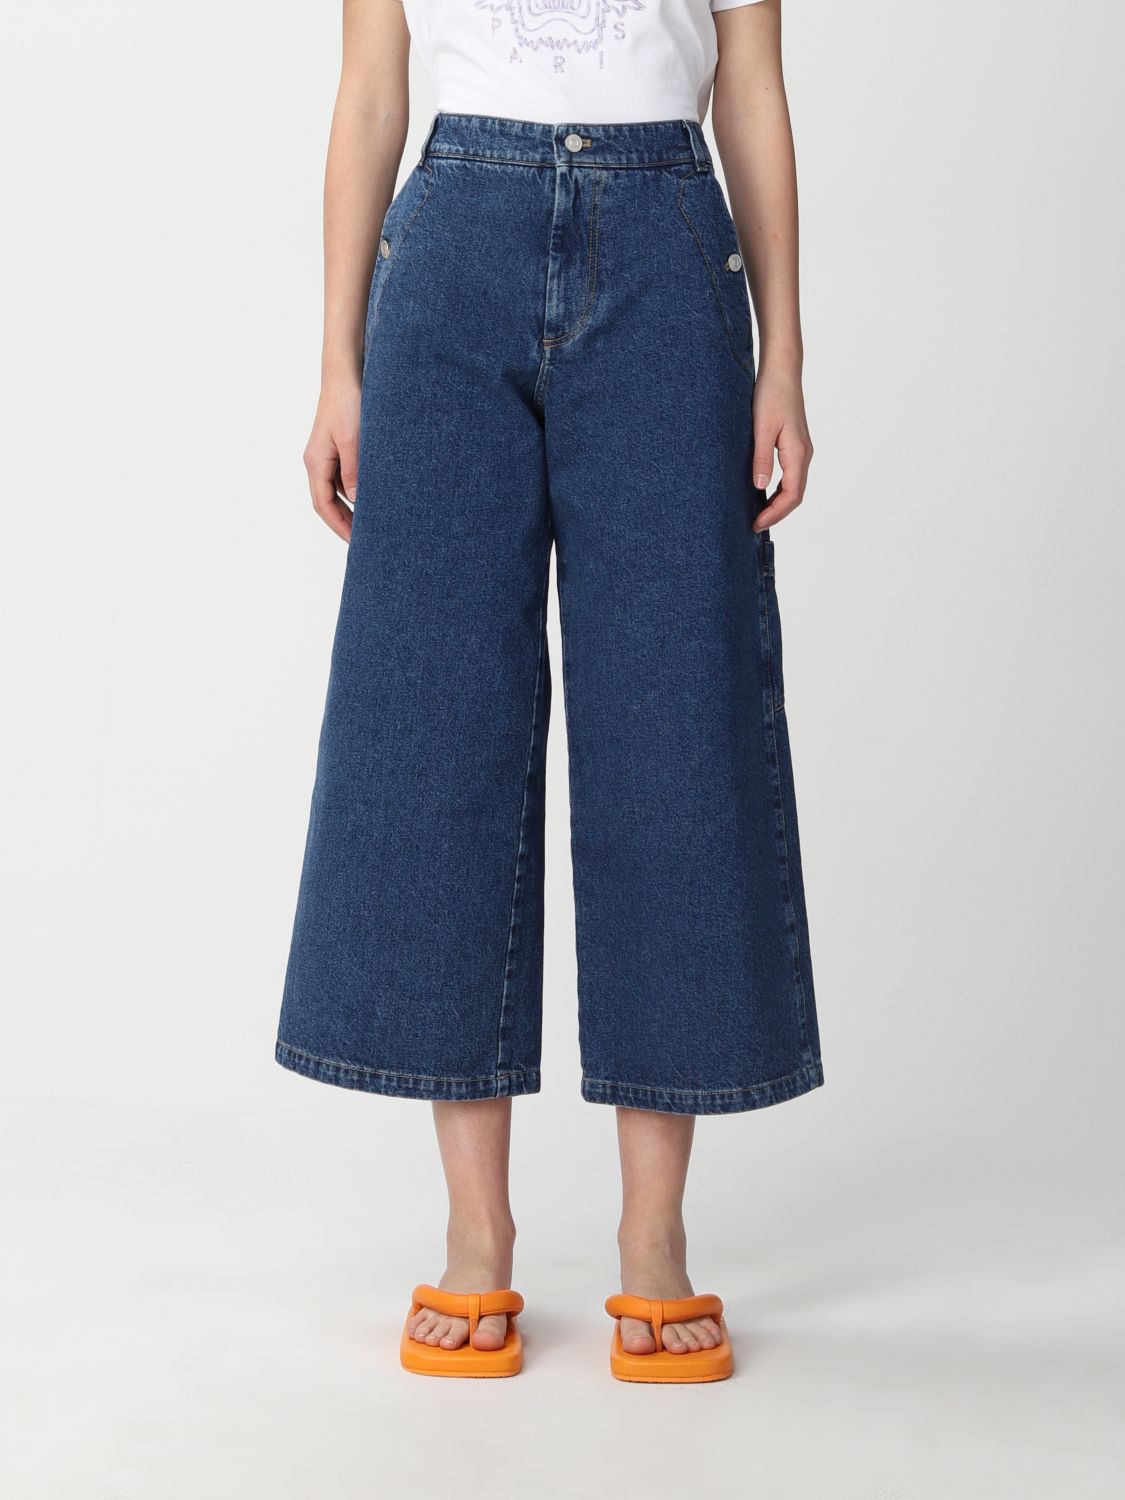 KENZO CROPPED JEANS IN COTTON DENIM,C87903082